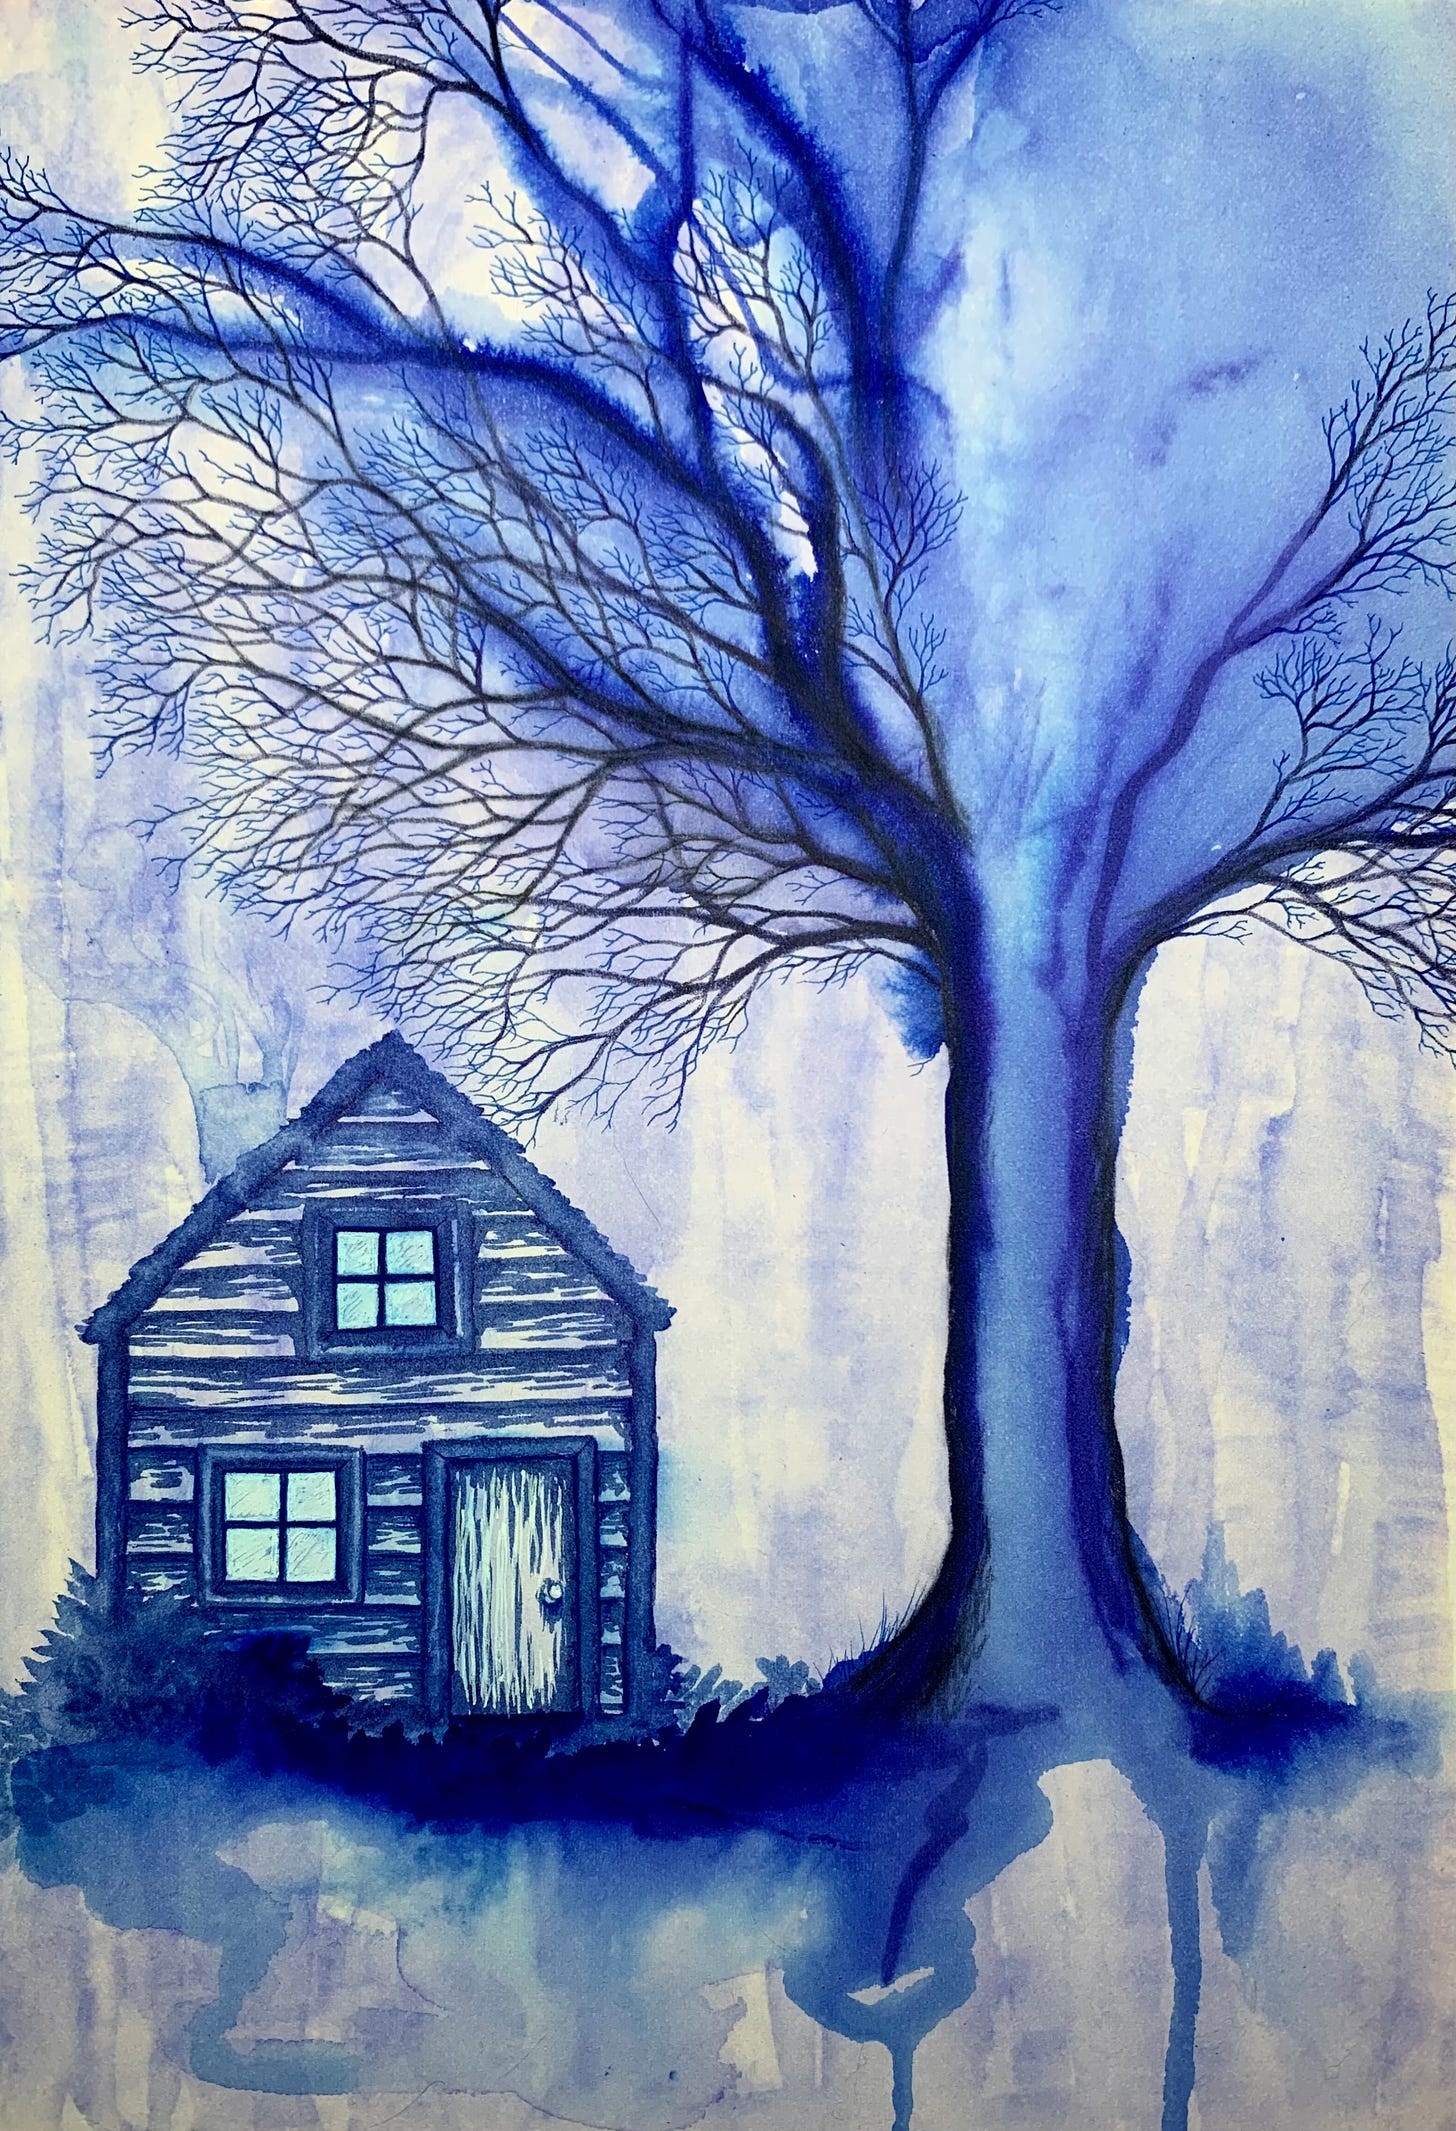 An ink drawing of a blue tree that fades into the background with a house beneath that has bright blue highlights on its windows and wooden slats.